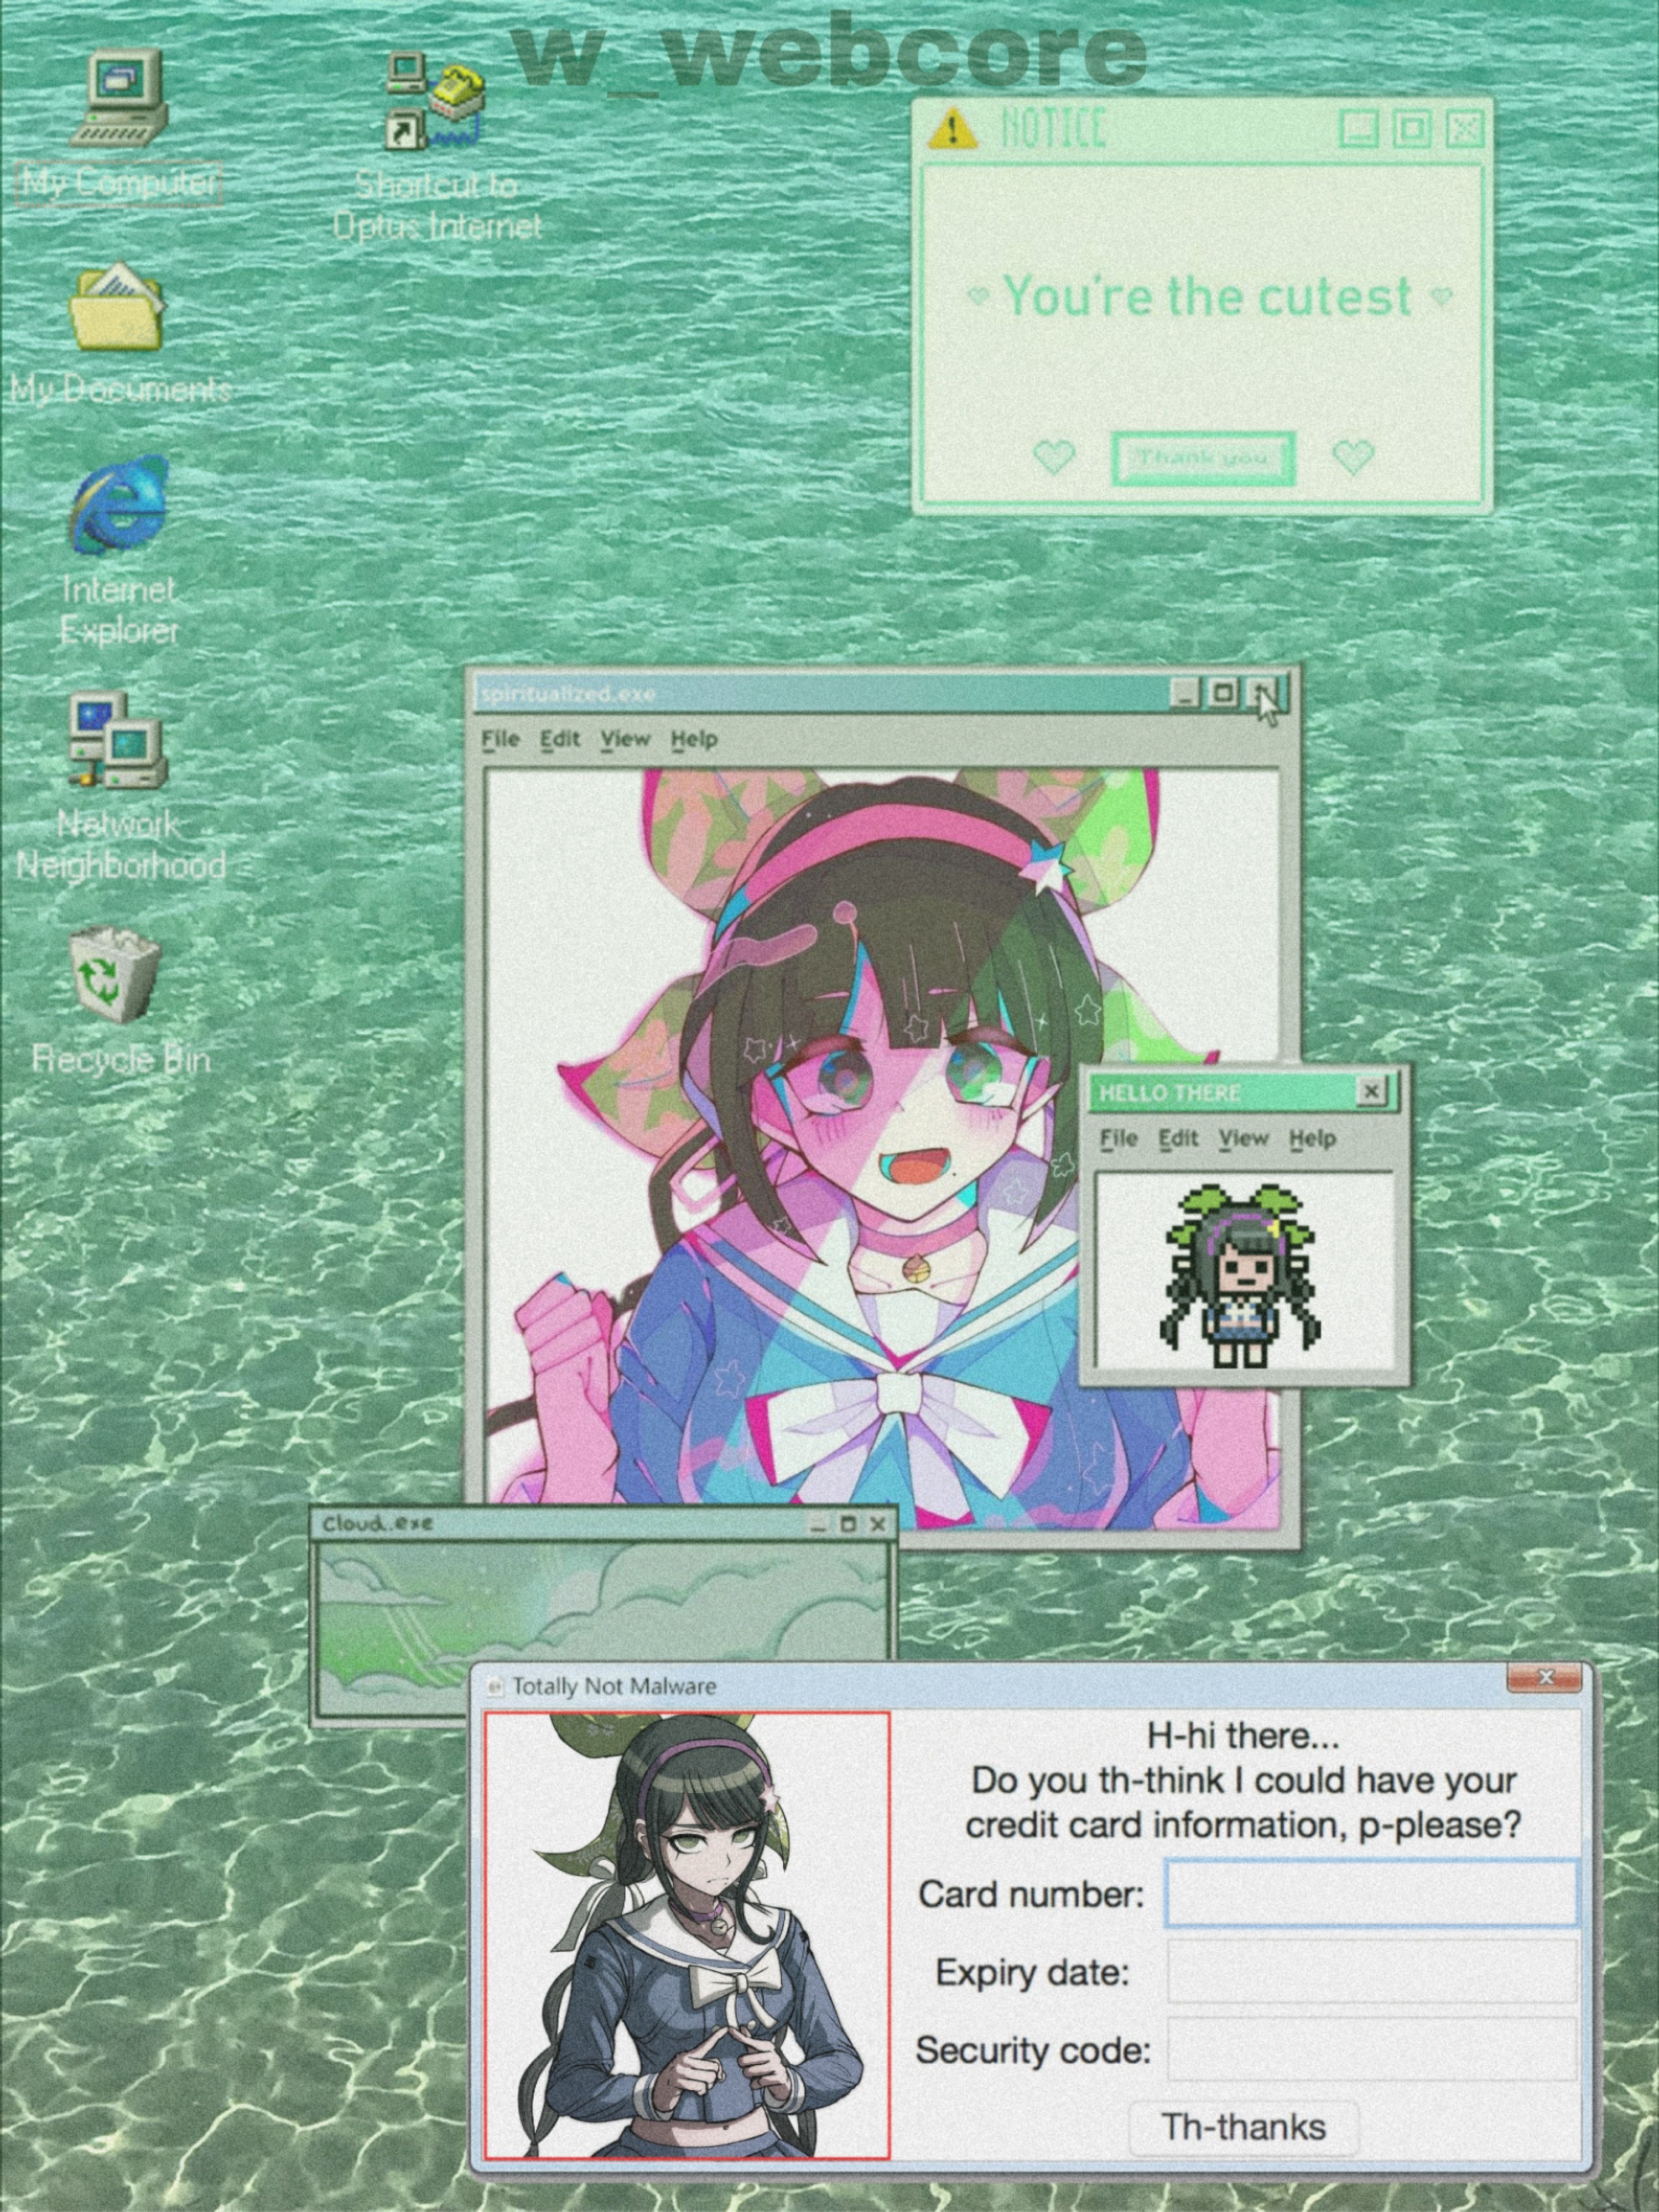 A screenshot of a computer desktop with a message that says 